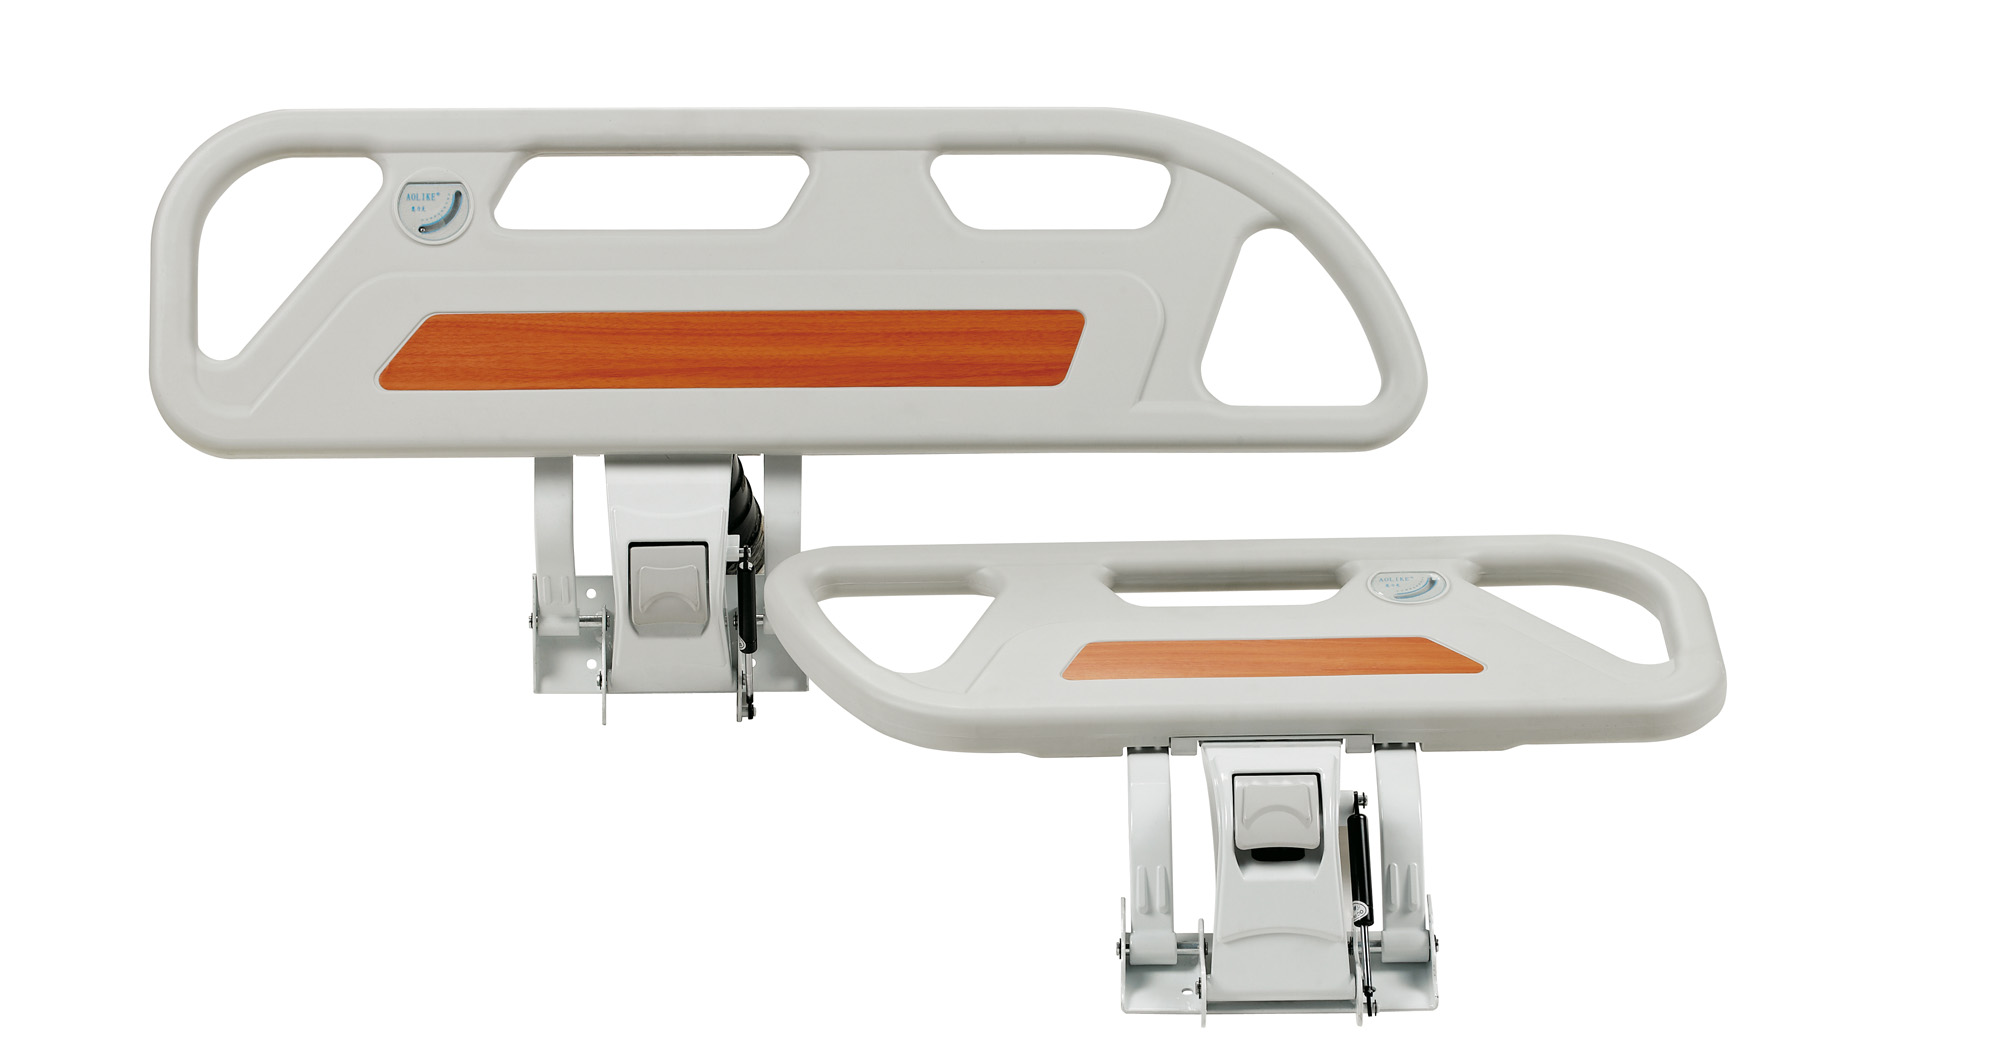 ALK06-B02P-B 3 function High Quality And Inexpensive Electric hospital bed for sale